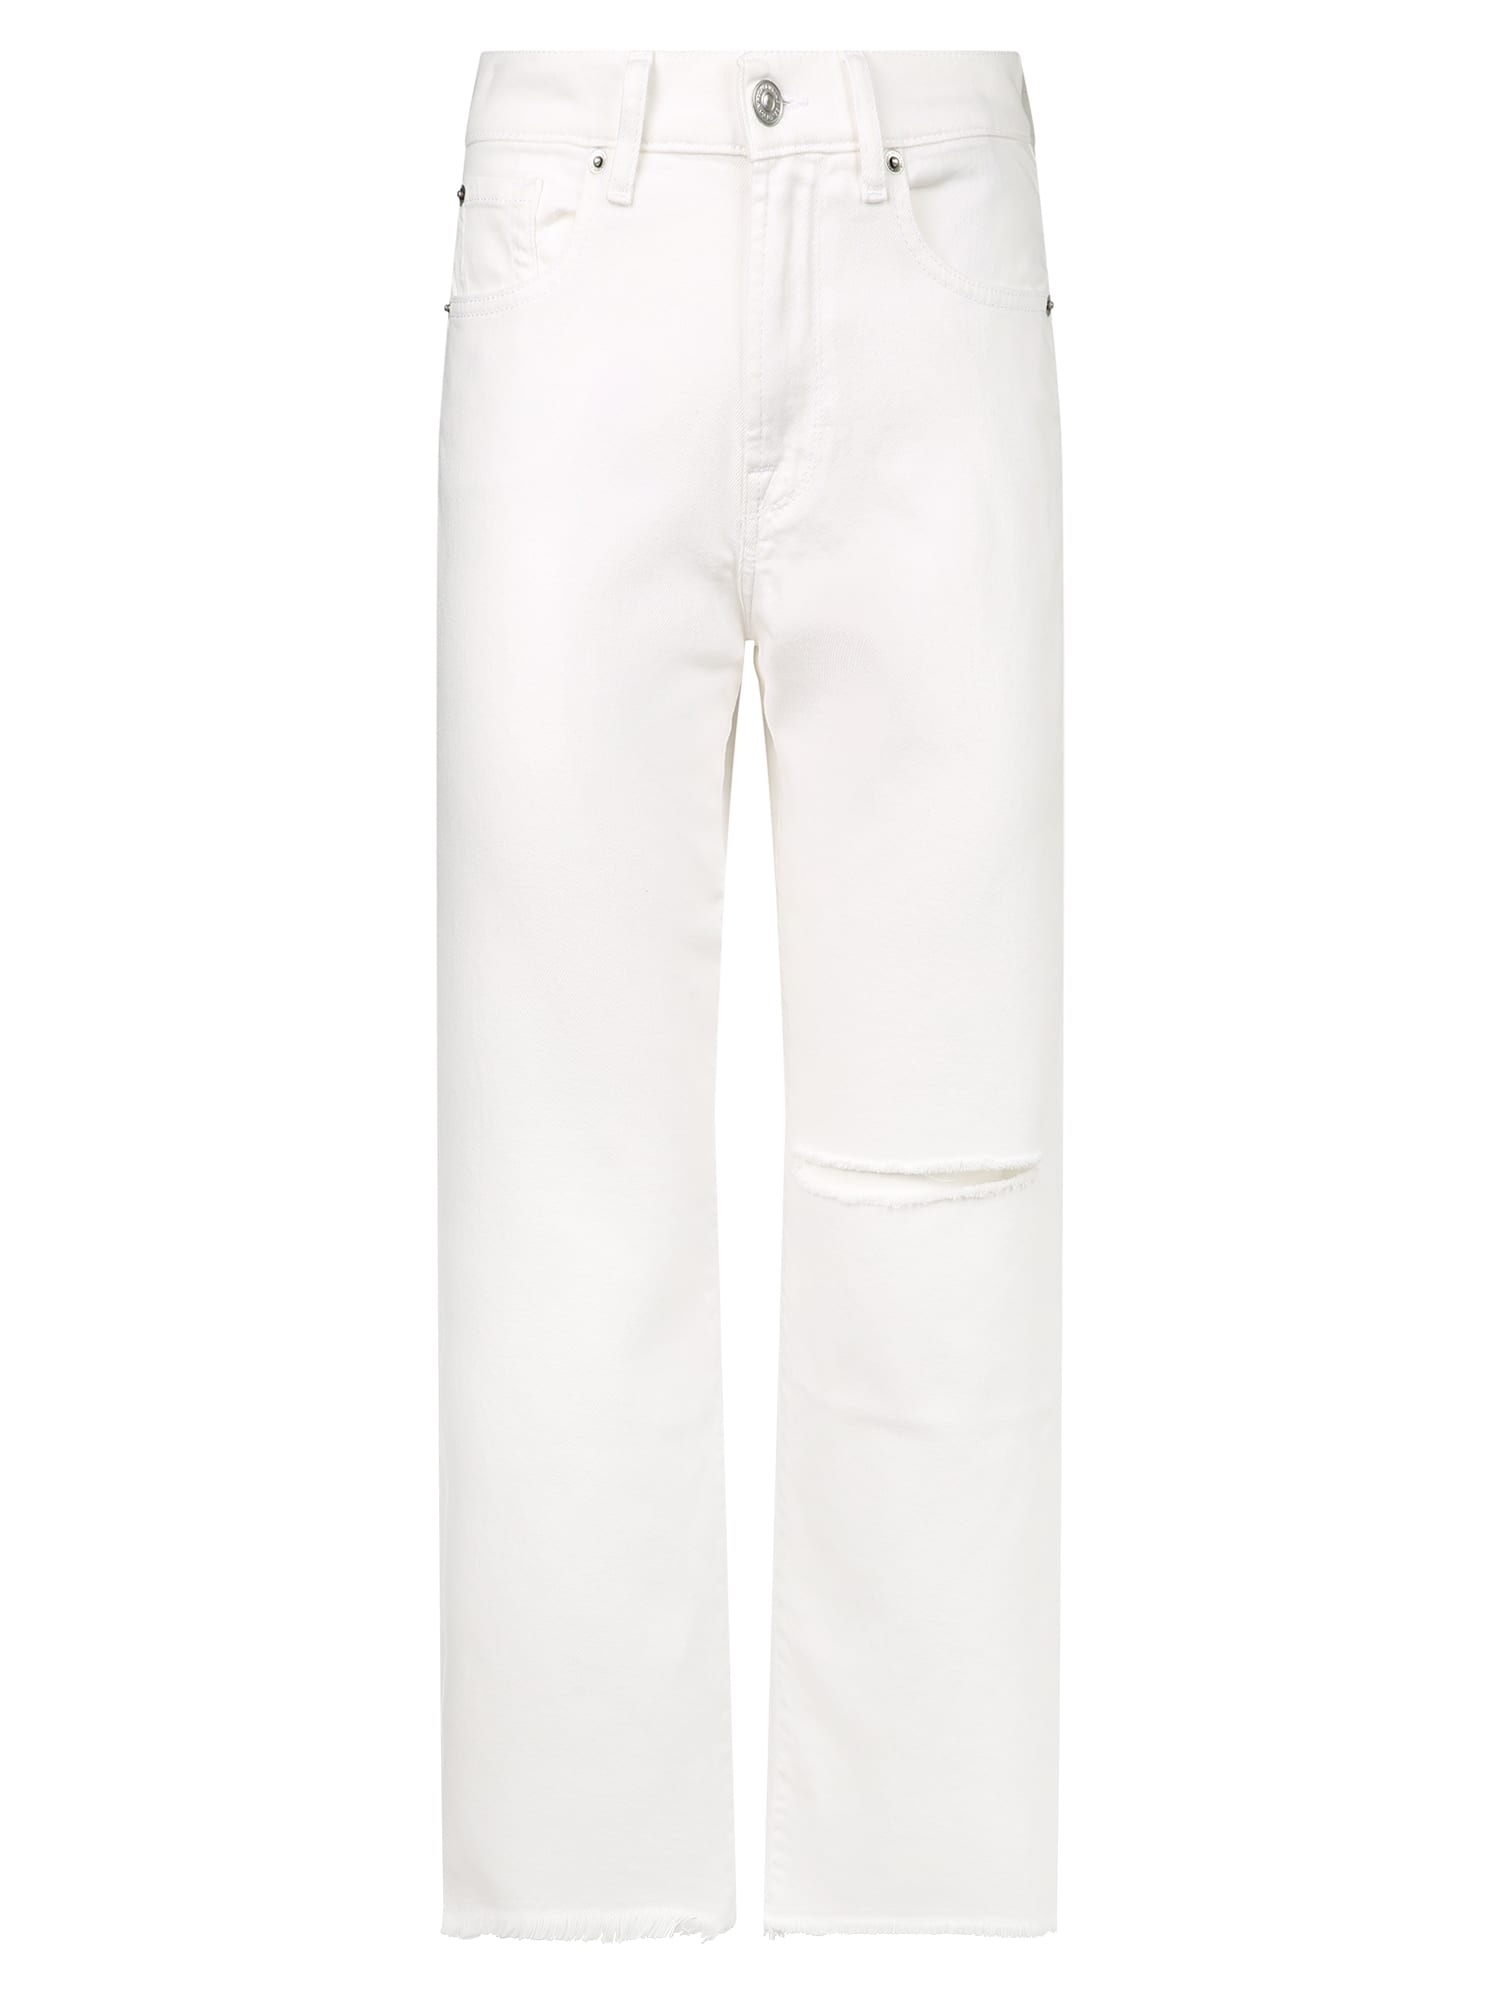 7 For All Mankind Straight Jeans